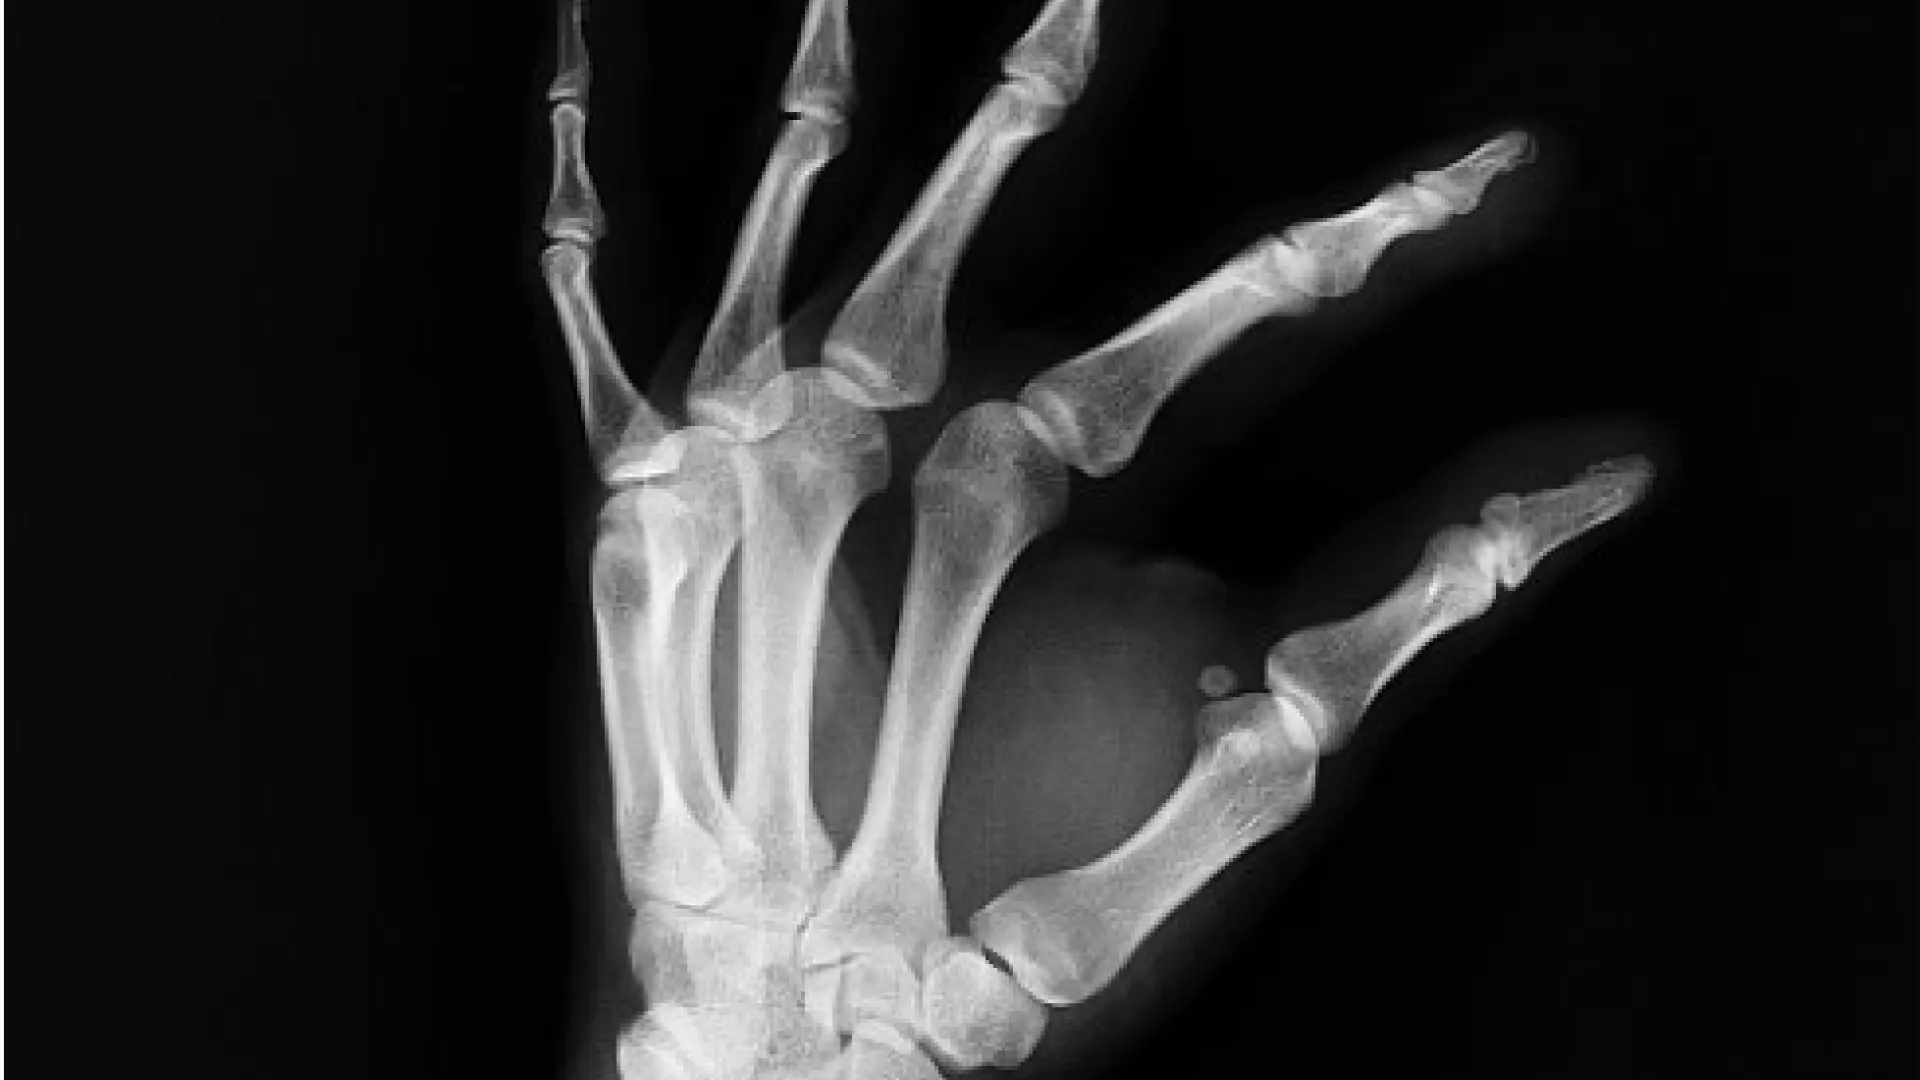 They’ve found a hormone that strengthens bones and could help treat bone problems